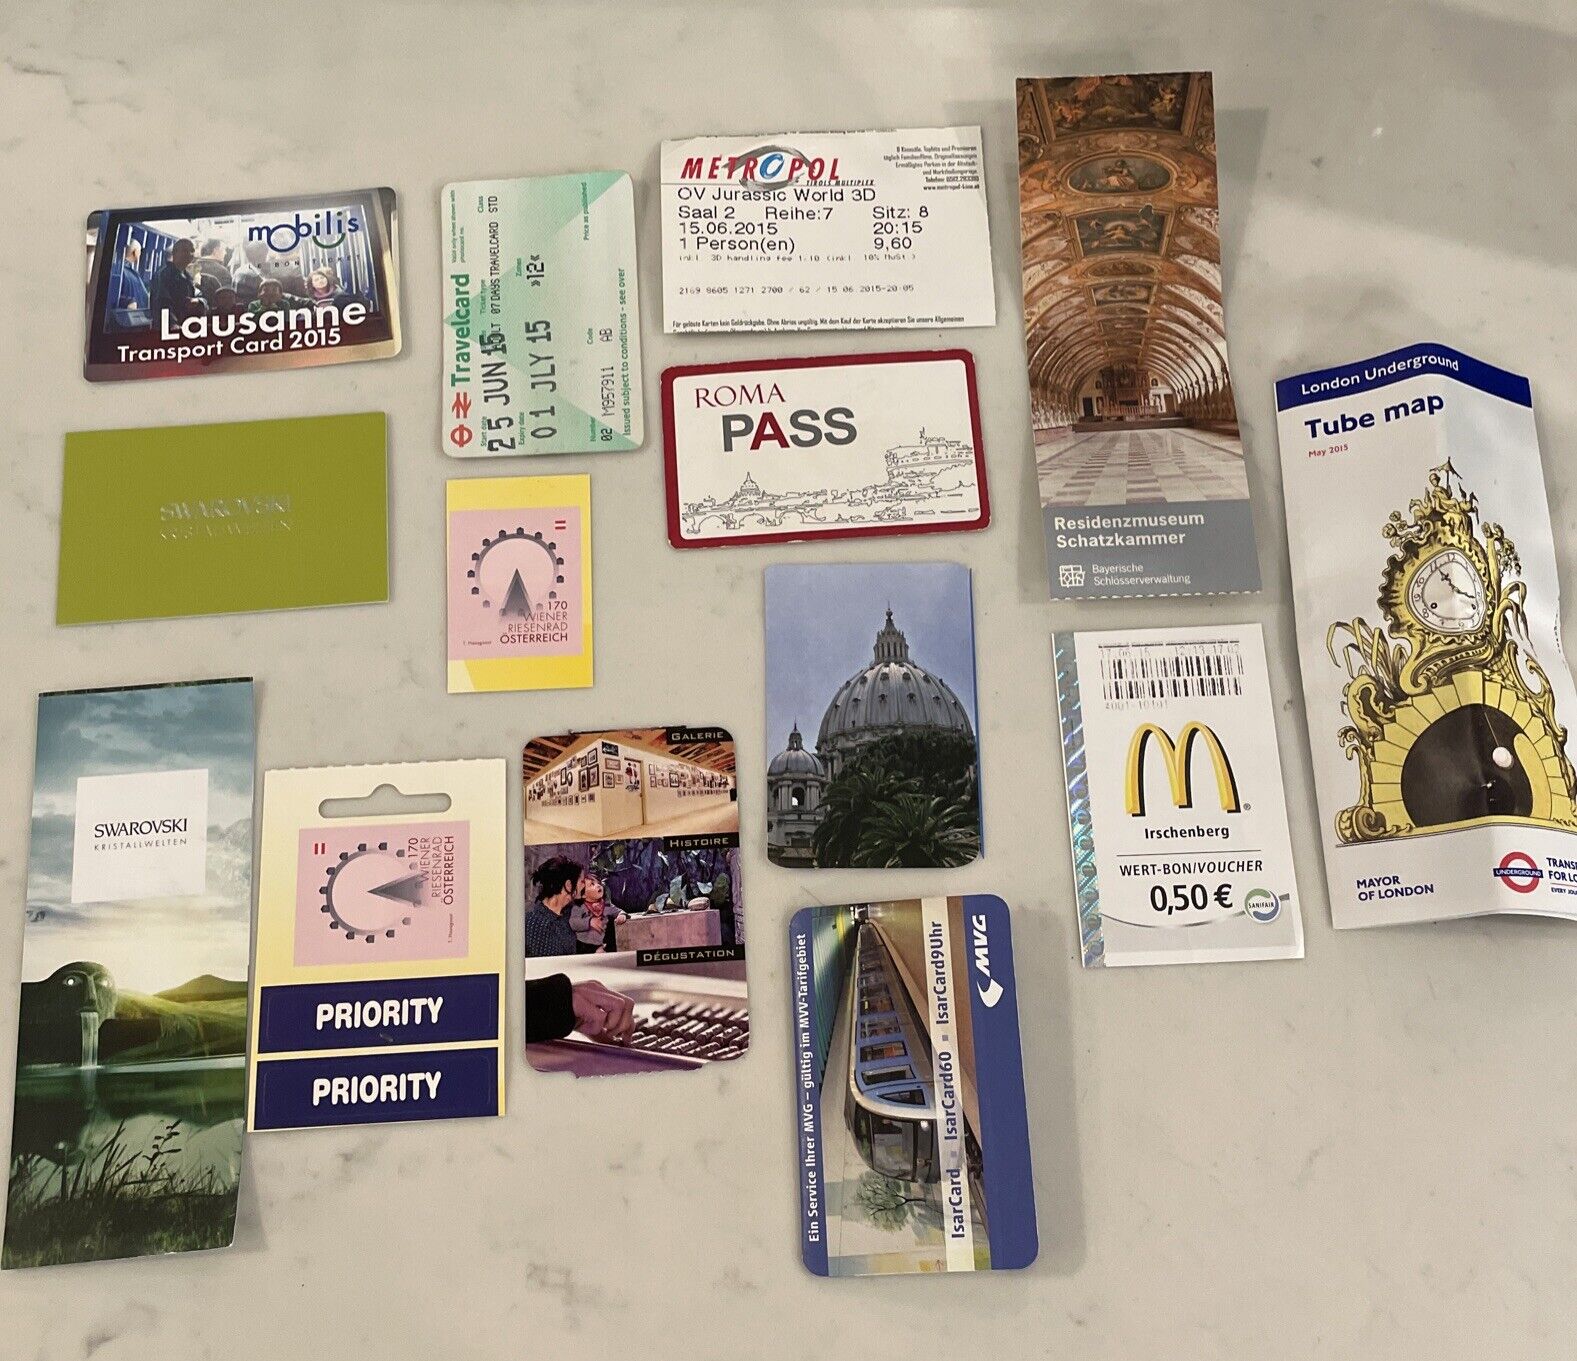 Vintage 2015 Receipts And Ticket Stubs From Tourist Sites In Europe